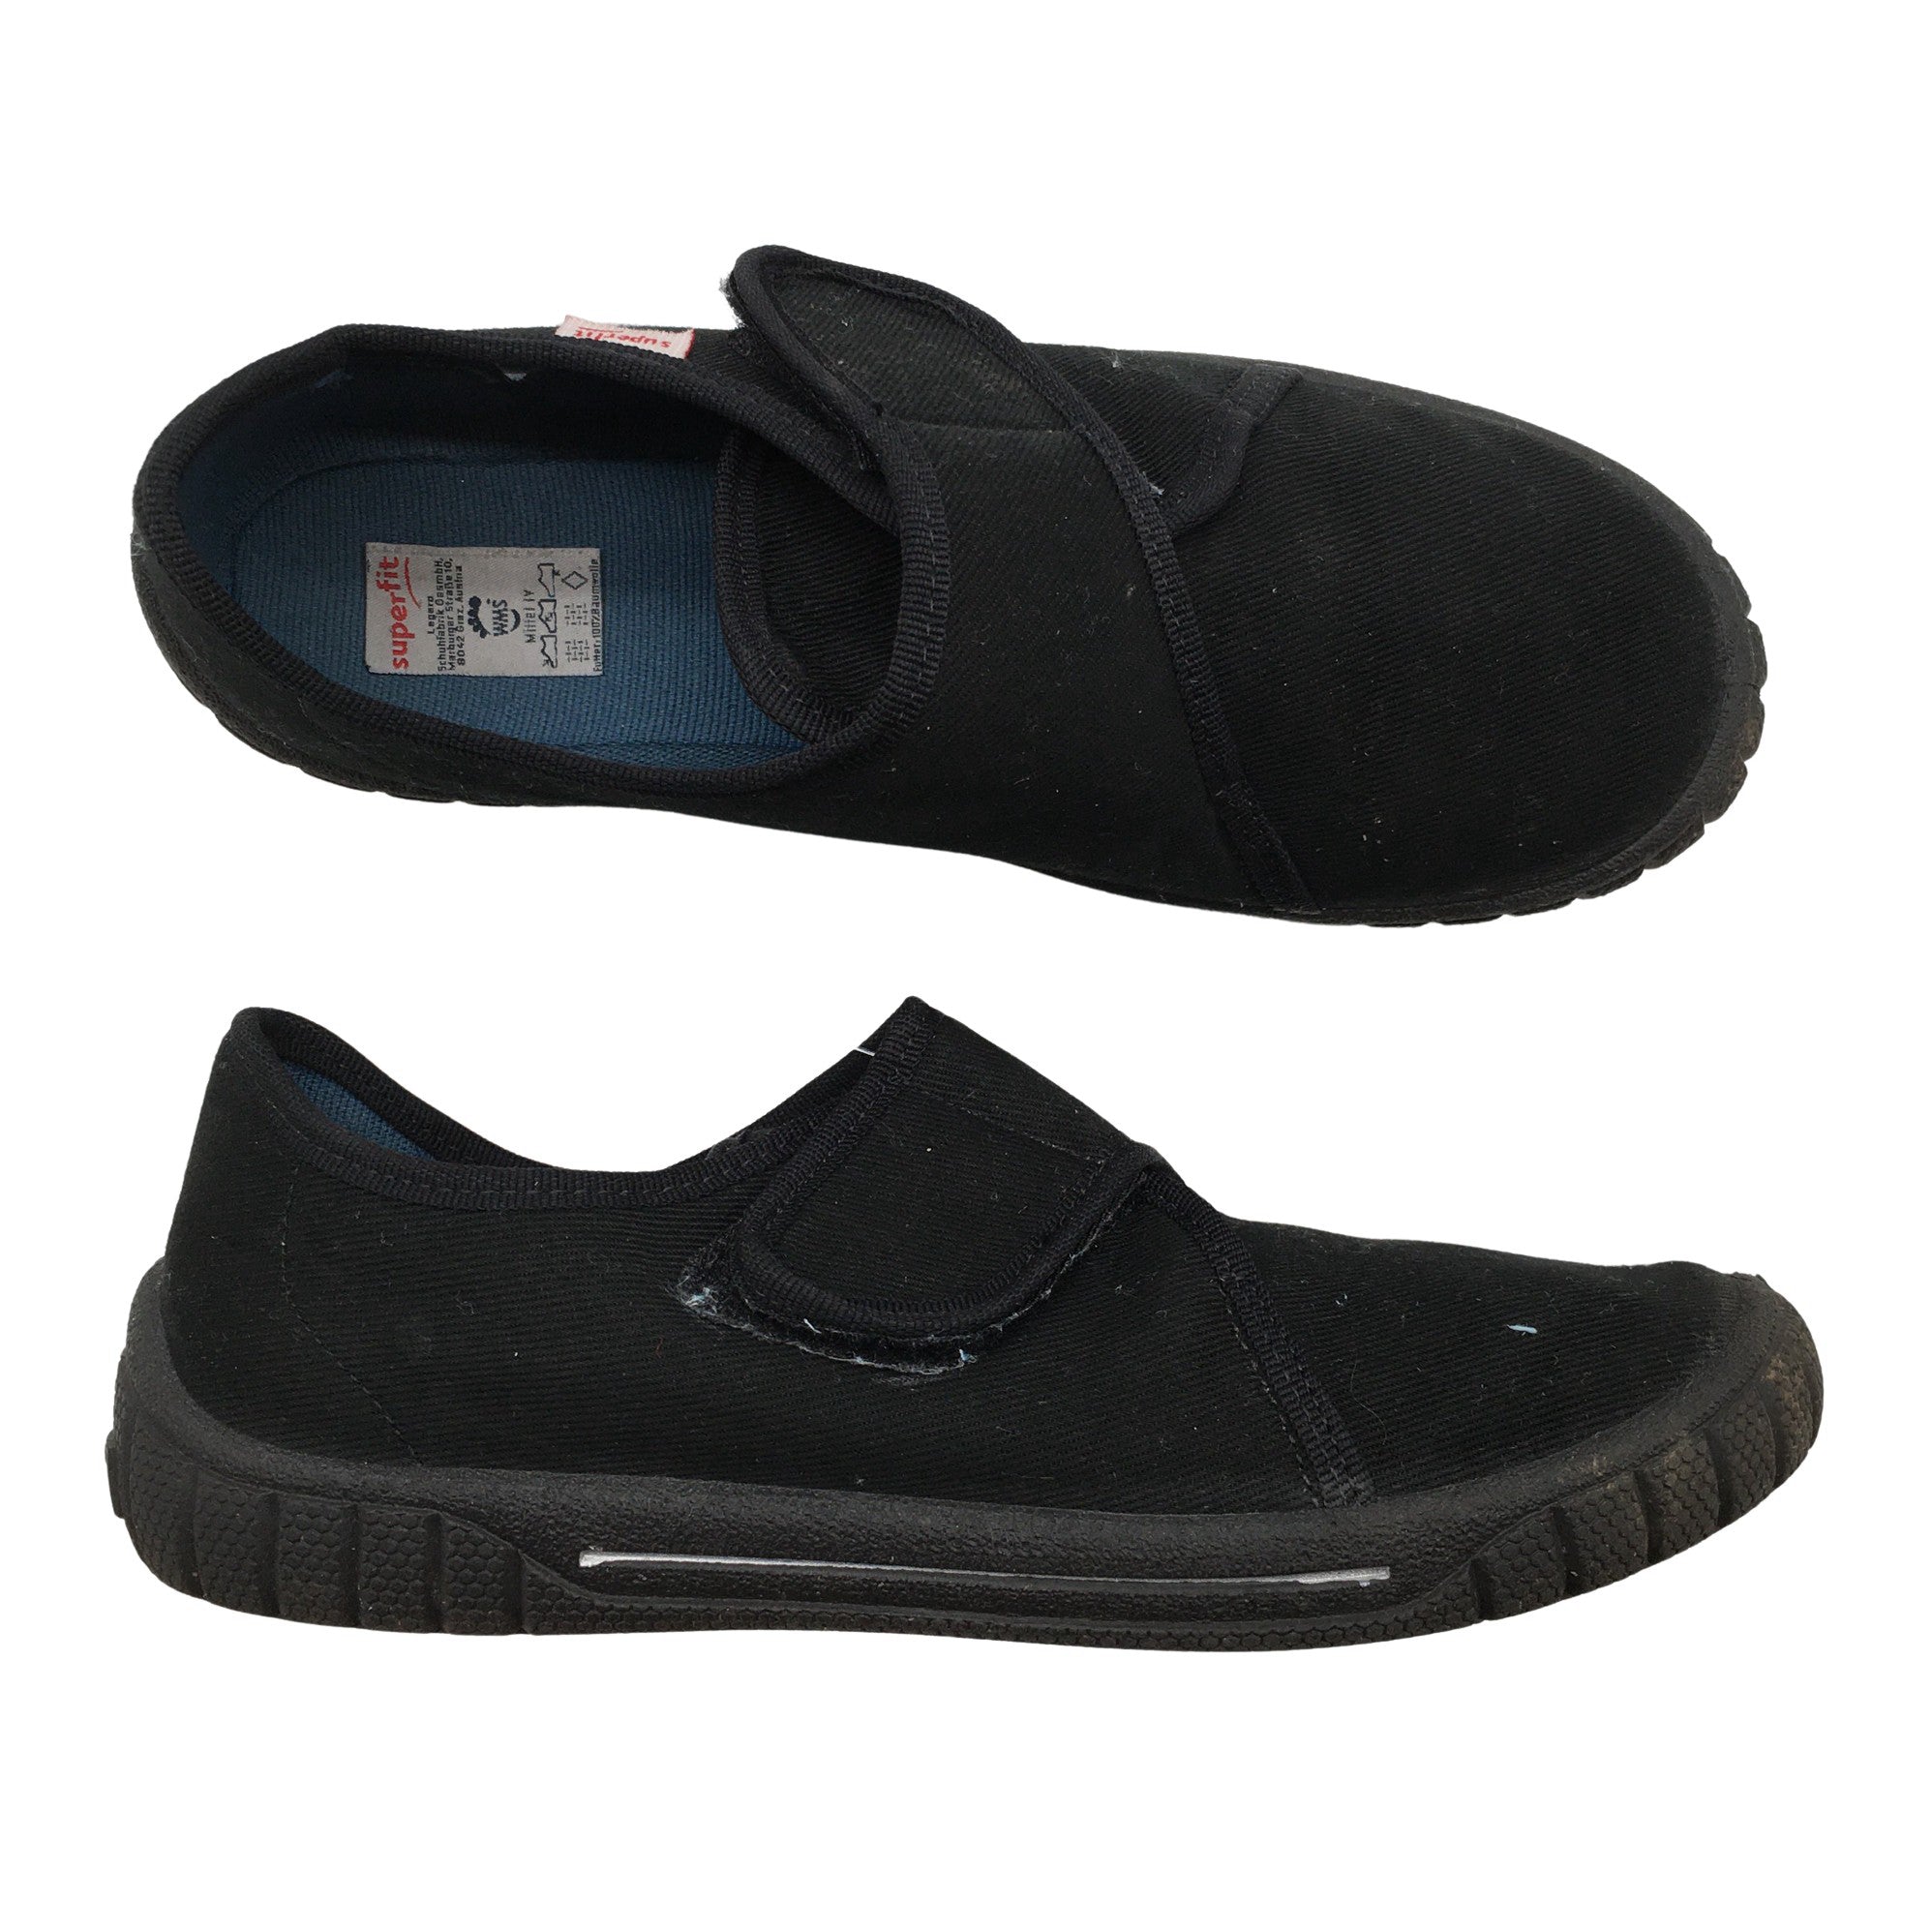 Unisex SuperFit Casual sneakers, size 33 (Black) | Emmy